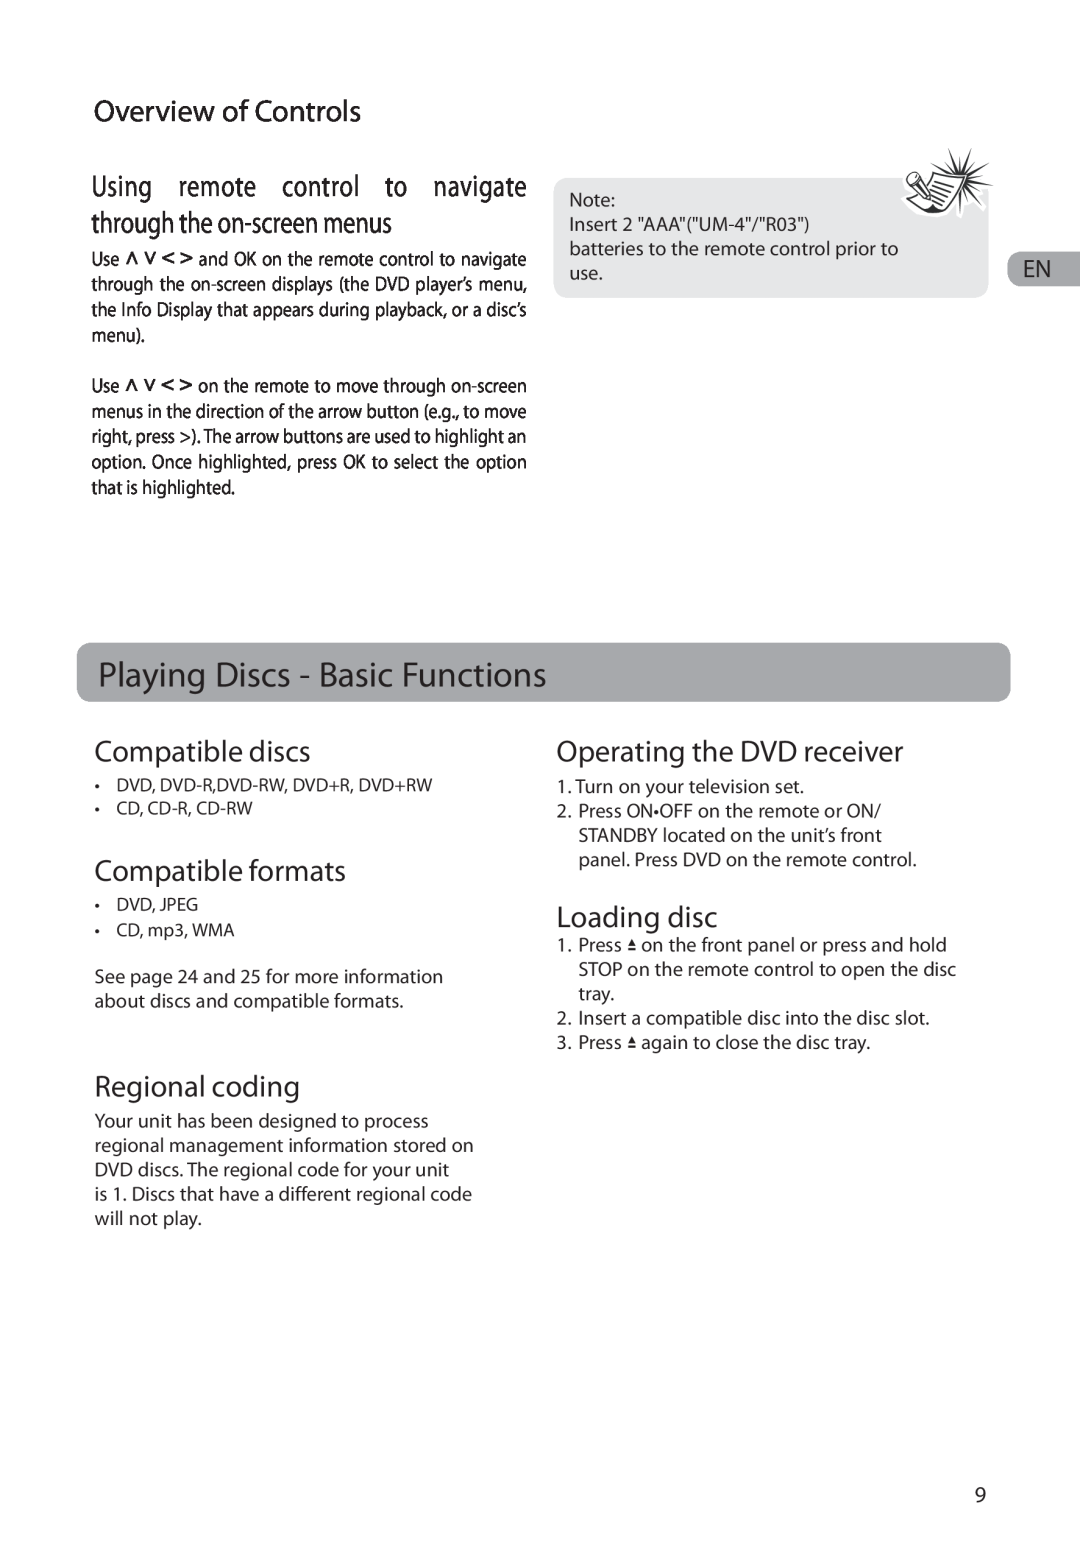 RCA RTD317 Playing Discs - Basic Functions, Overview of Controls, Compatible discs, Compatible formats, Regional coding 